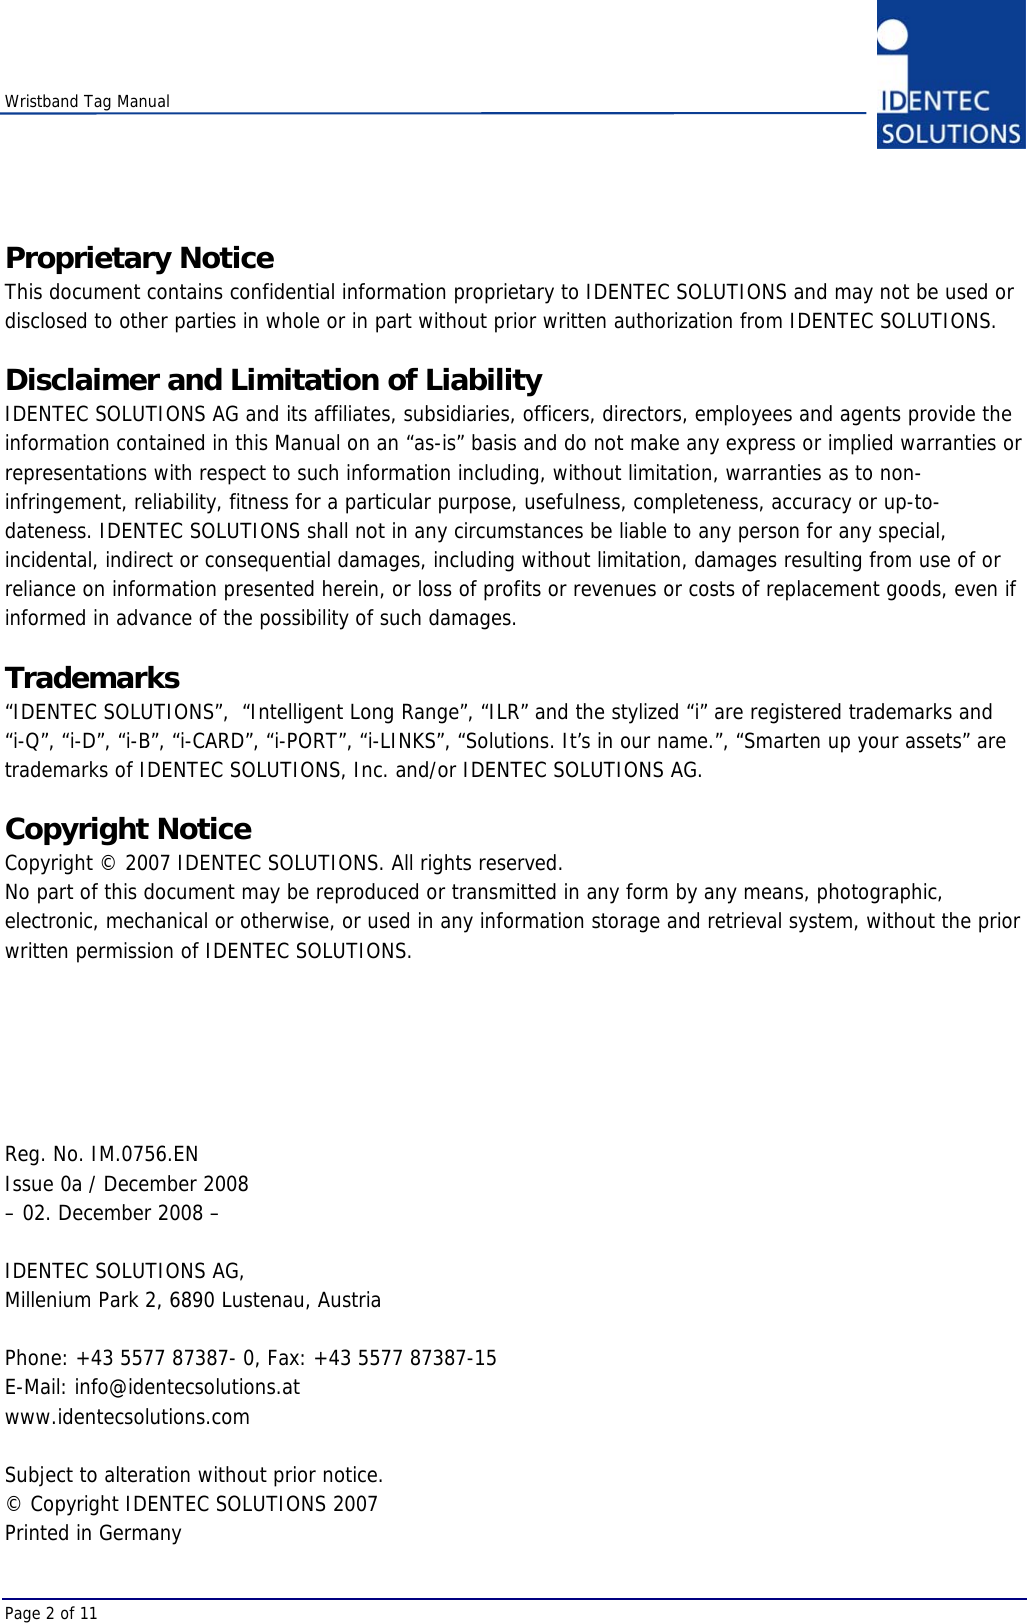    Wristband Tag Manual Page 2 of 11 Proprietary Notice This document contains confidential information proprietary to IDENTEC SOLUTIONS and may not be used or disclosed to other parties in whole or in part without prior written authorization from IDENTEC SOLUTIONS.  Disclaimer and Limitation of Liability IDENTEC SOLUTIONS AG and its affiliates, subsidiaries, officers, directors, employees and agents provide the information contained in this Manual on an “as-is” basis and do not make any express or implied warranties or representations with respect to such information including, without limitation, warranties as to non-infringement, reliability, fitness for a particular purpose, usefulness, completeness, accuracy or up-to-dateness. IDENTEC SOLUTIONS shall not in any circumstances be liable to any person for any special, incidental, indirect or consequential damages, including without limitation, damages resulting from use of or reliance on information presented herein, or loss of profits or revenues or costs of replacement goods, even if informed in advance of the possibility of such damages.  Trademarks “IDENTEC SOLUTIONS”,  “Intelligent Long Range”, “ILR” and the stylized “i” are registered trademarks and  “i-Q”, “i-D”, “i-B”, “i-CARD”, “i-PORT”, “i-LINKS”, “Solutions. It’s in our name.”, “Smarten up your assets” are trademarks of IDENTEC SOLUTIONS, Inc. and/or IDENTEC SOLUTIONS AG.  Copyright Notice Copyright © 2007 IDENTEC SOLUTIONS. All rights reserved. No part of this document may be reproduced or transmitted in any form by any means, photographic, electronic, mechanical or otherwise, or used in any information storage and retrieval system, without the prior written permission of IDENTEC SOLUTIONS.       Reg. No. IM.0756.EN Issue 0a / December 2008 – 02. December 2008 –  IDENTEC SOLUTIONS AG,  Millenium Park 2, 6890 Lustenau, Austria  Phone: +43 5577 87387- 0, Fax: +43 5577 87387-15 E-Mail: info@identecsolutions.at www.identecsolutions.com  Subject to alteration without prior notice. © Copyright IDENTEC SOLUTIONS 2007 Printed in Germany 